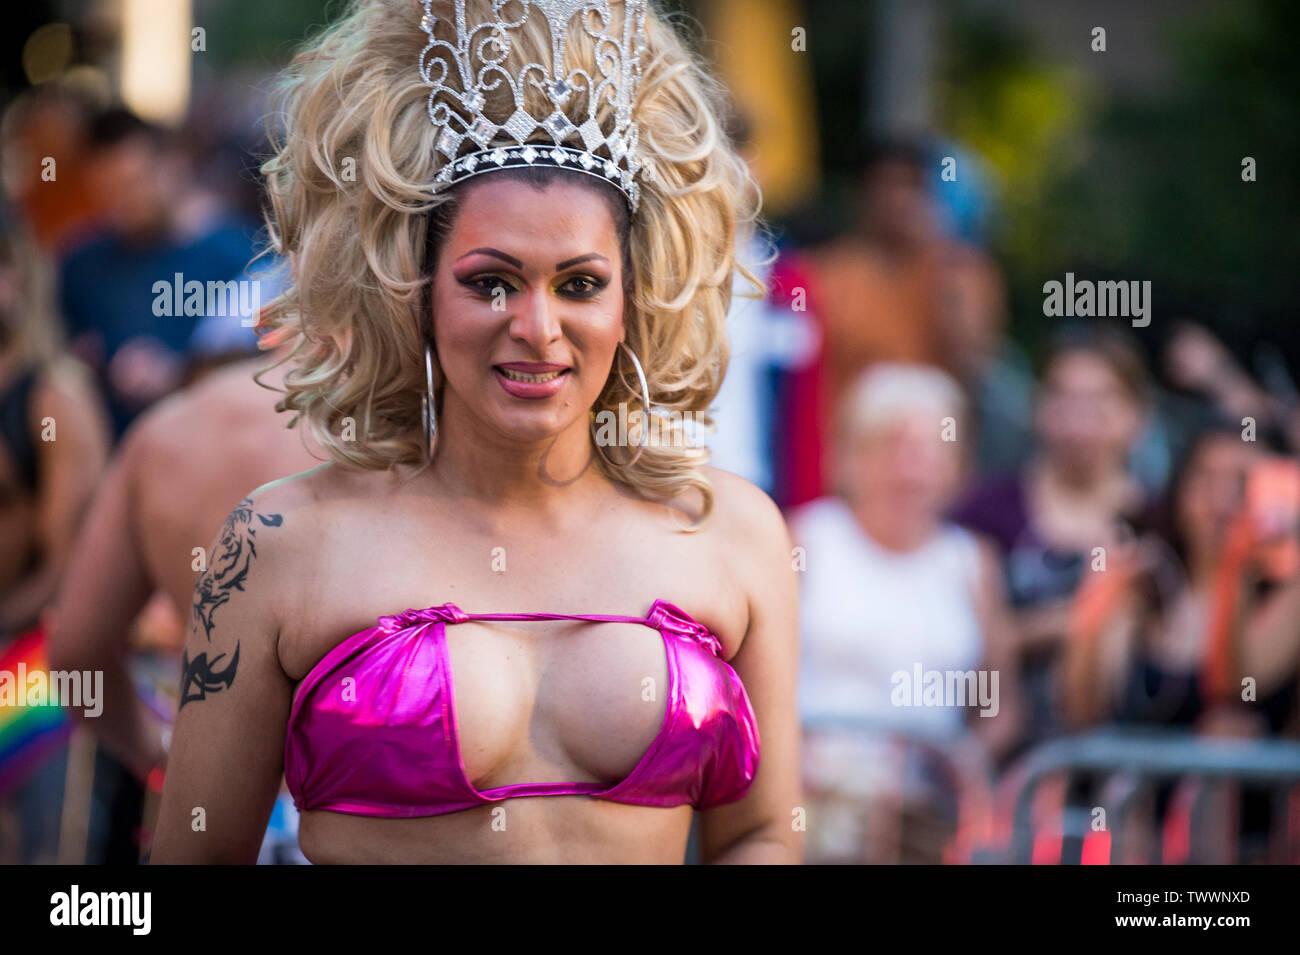 NEW YORK CITY - JUNE 25, 2017: A transgender drag performer wearing a beauty queen tiara on big hair smiles from a float in the gay pride parade. Stock Photo